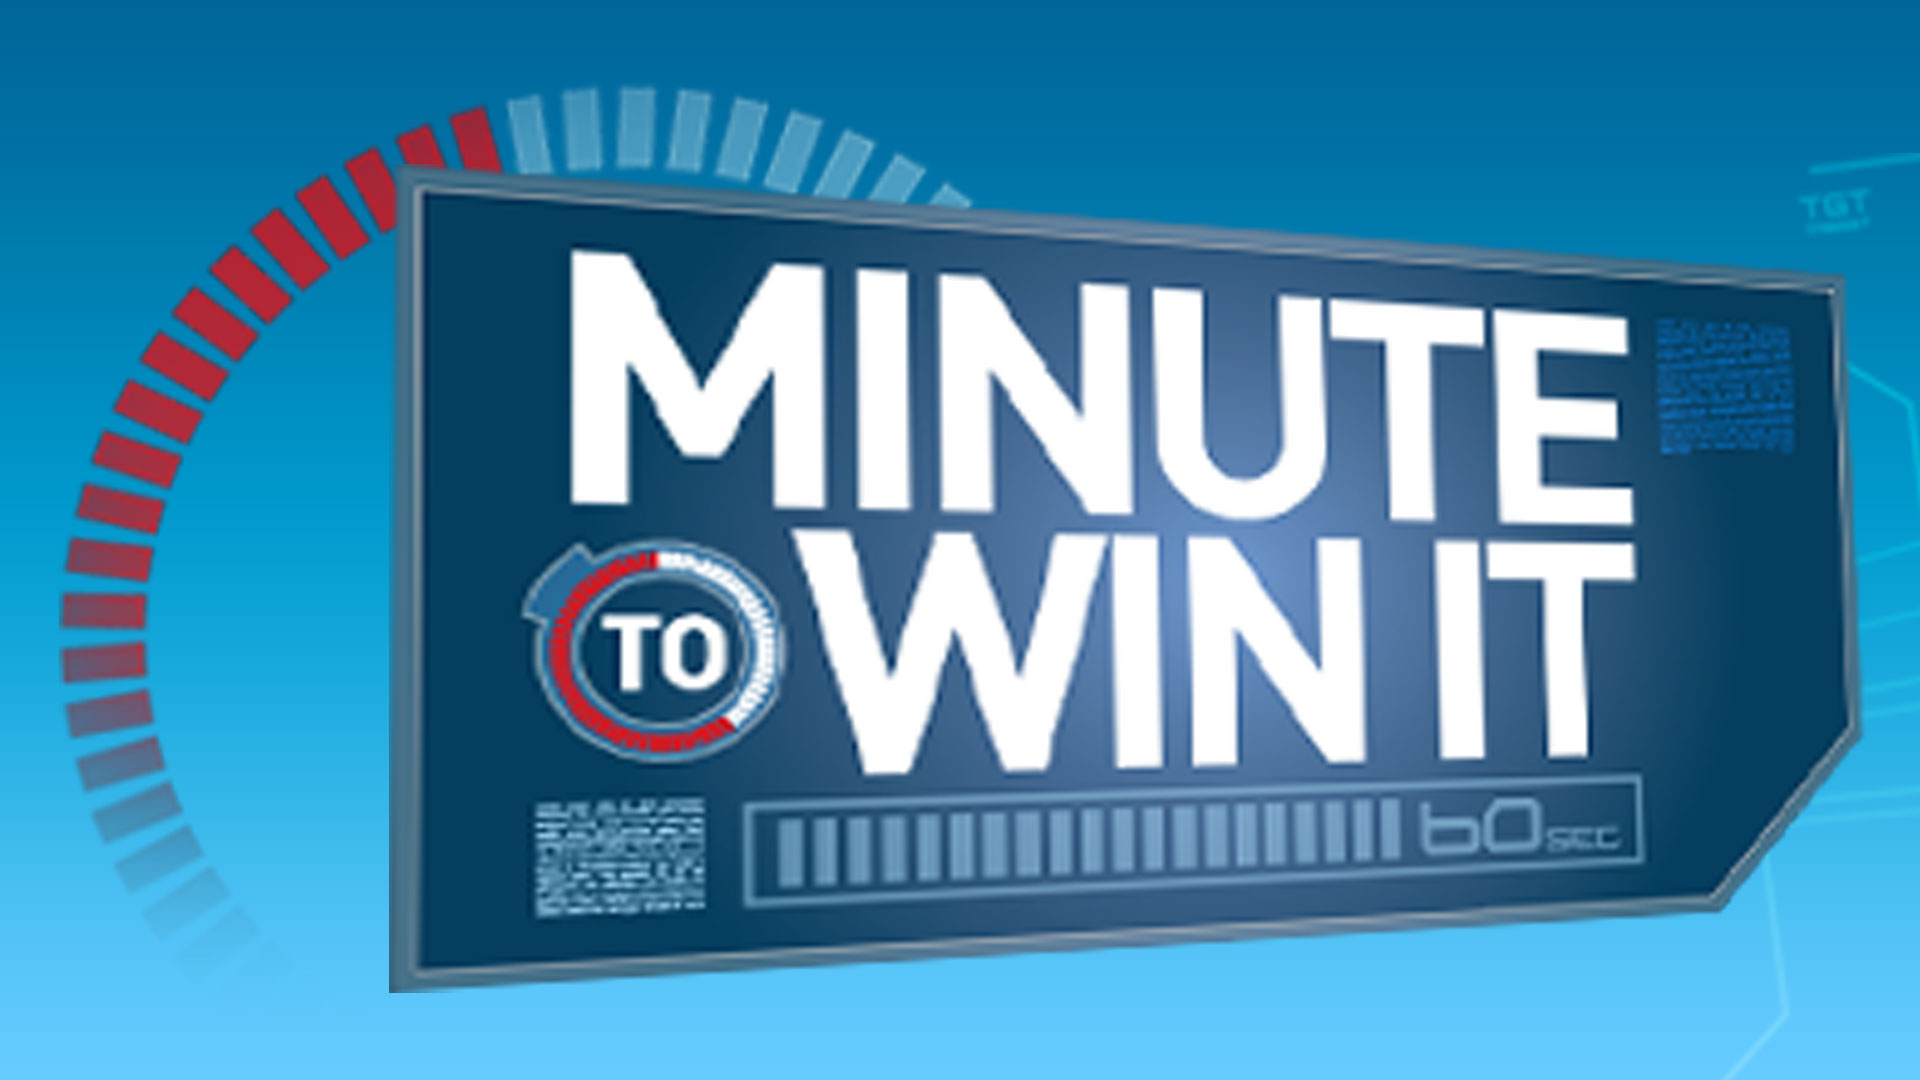 Minute To Win It Invitations Free 200 Hilarious Minute To Win It Games Everyone Will Absolutely Love The Holiday Season Is So Crazy Around The Stores We Schedule Our Staff